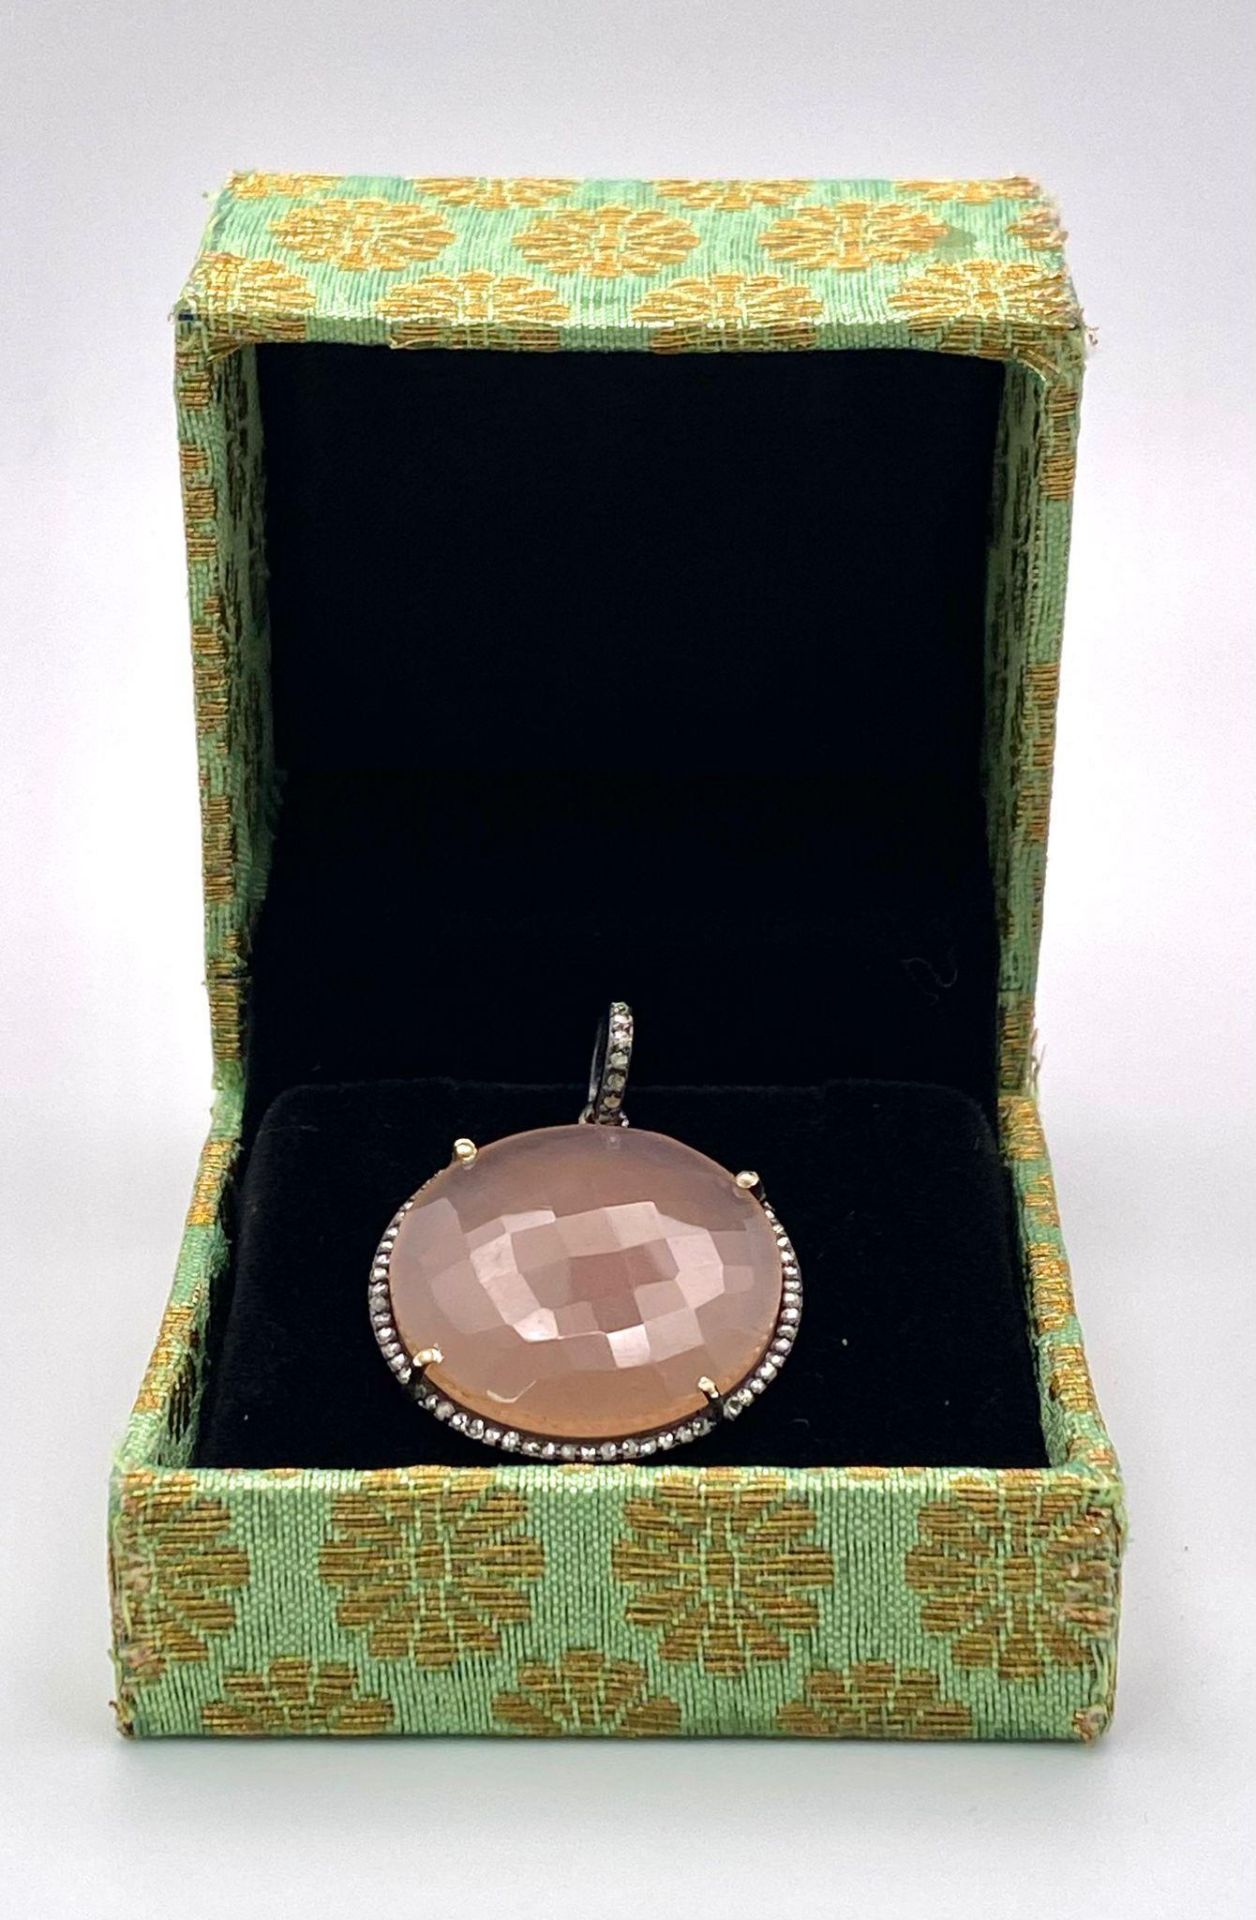 A Circular Rose Quartz and Diamonds Pendant. Faceted rose quartz cabochon with a diamond halo and - Image 7 of 9